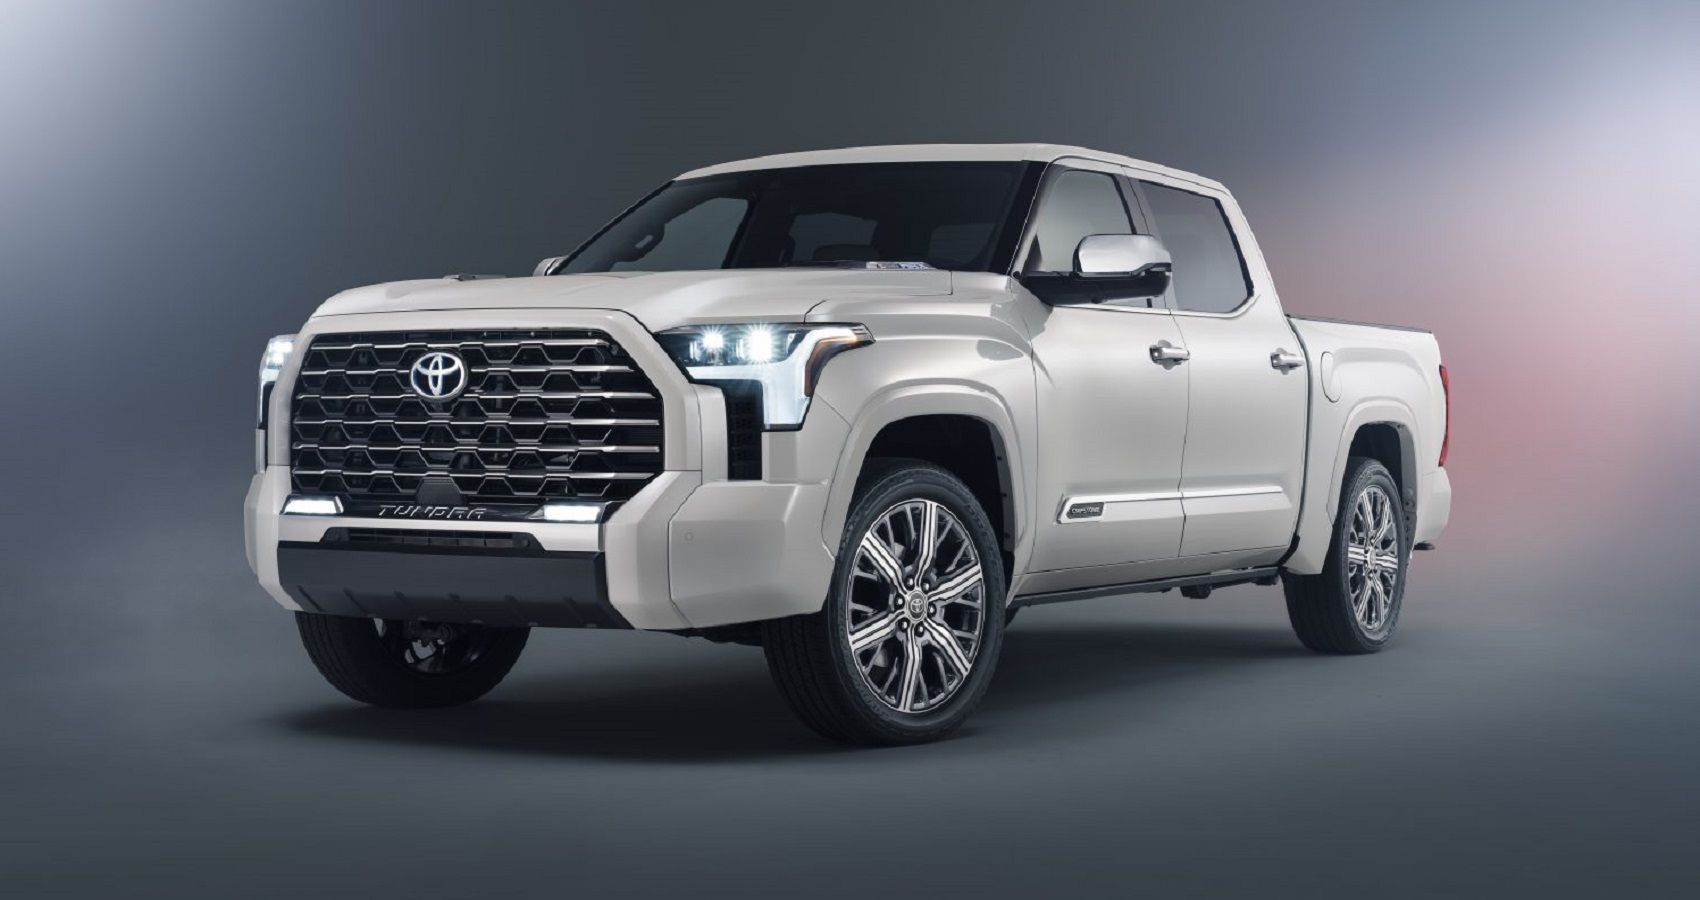 China’s SVH Tundar Blatantly Ripping Off The Tundra Pickup May Not Sit